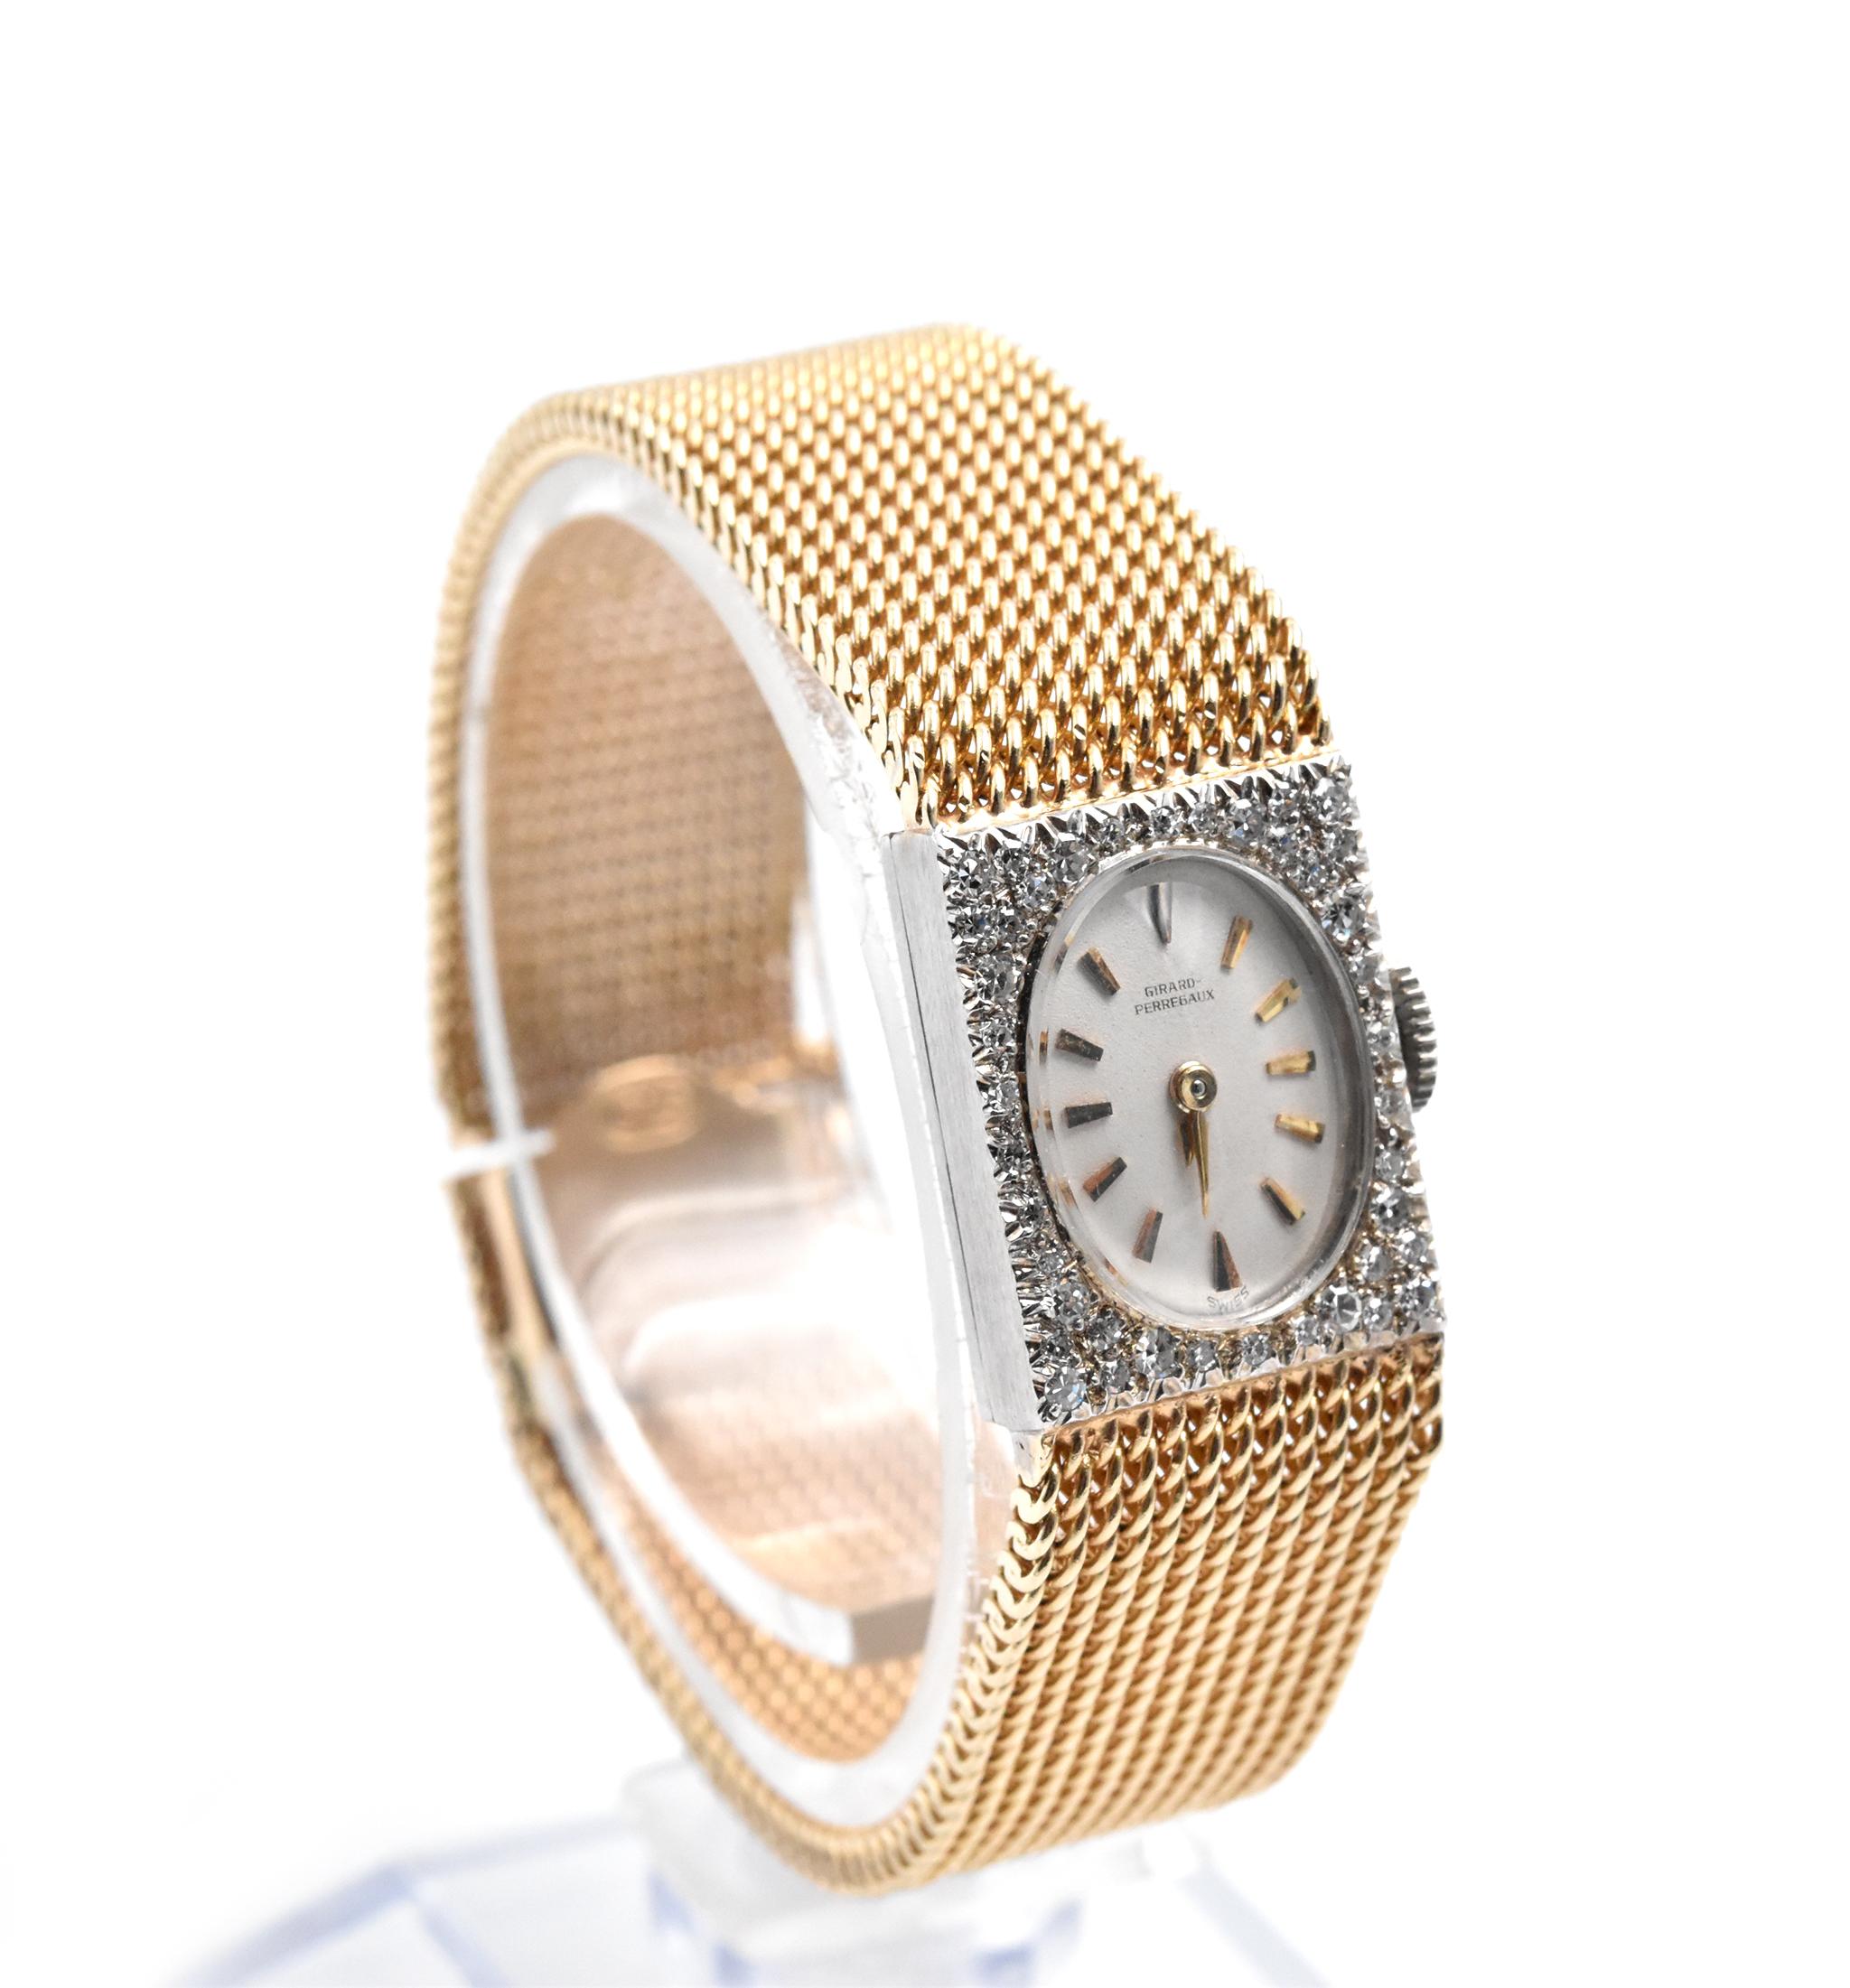 Movement: manual wind
Function: hours, minutes
Case: 18x14mm rectangle, 14k white gold case with diamond bezel, plastic crystal
Band: 14k yellow gold band with box and tongue clasp 
Dial: white dial with gold diamond markers and gold